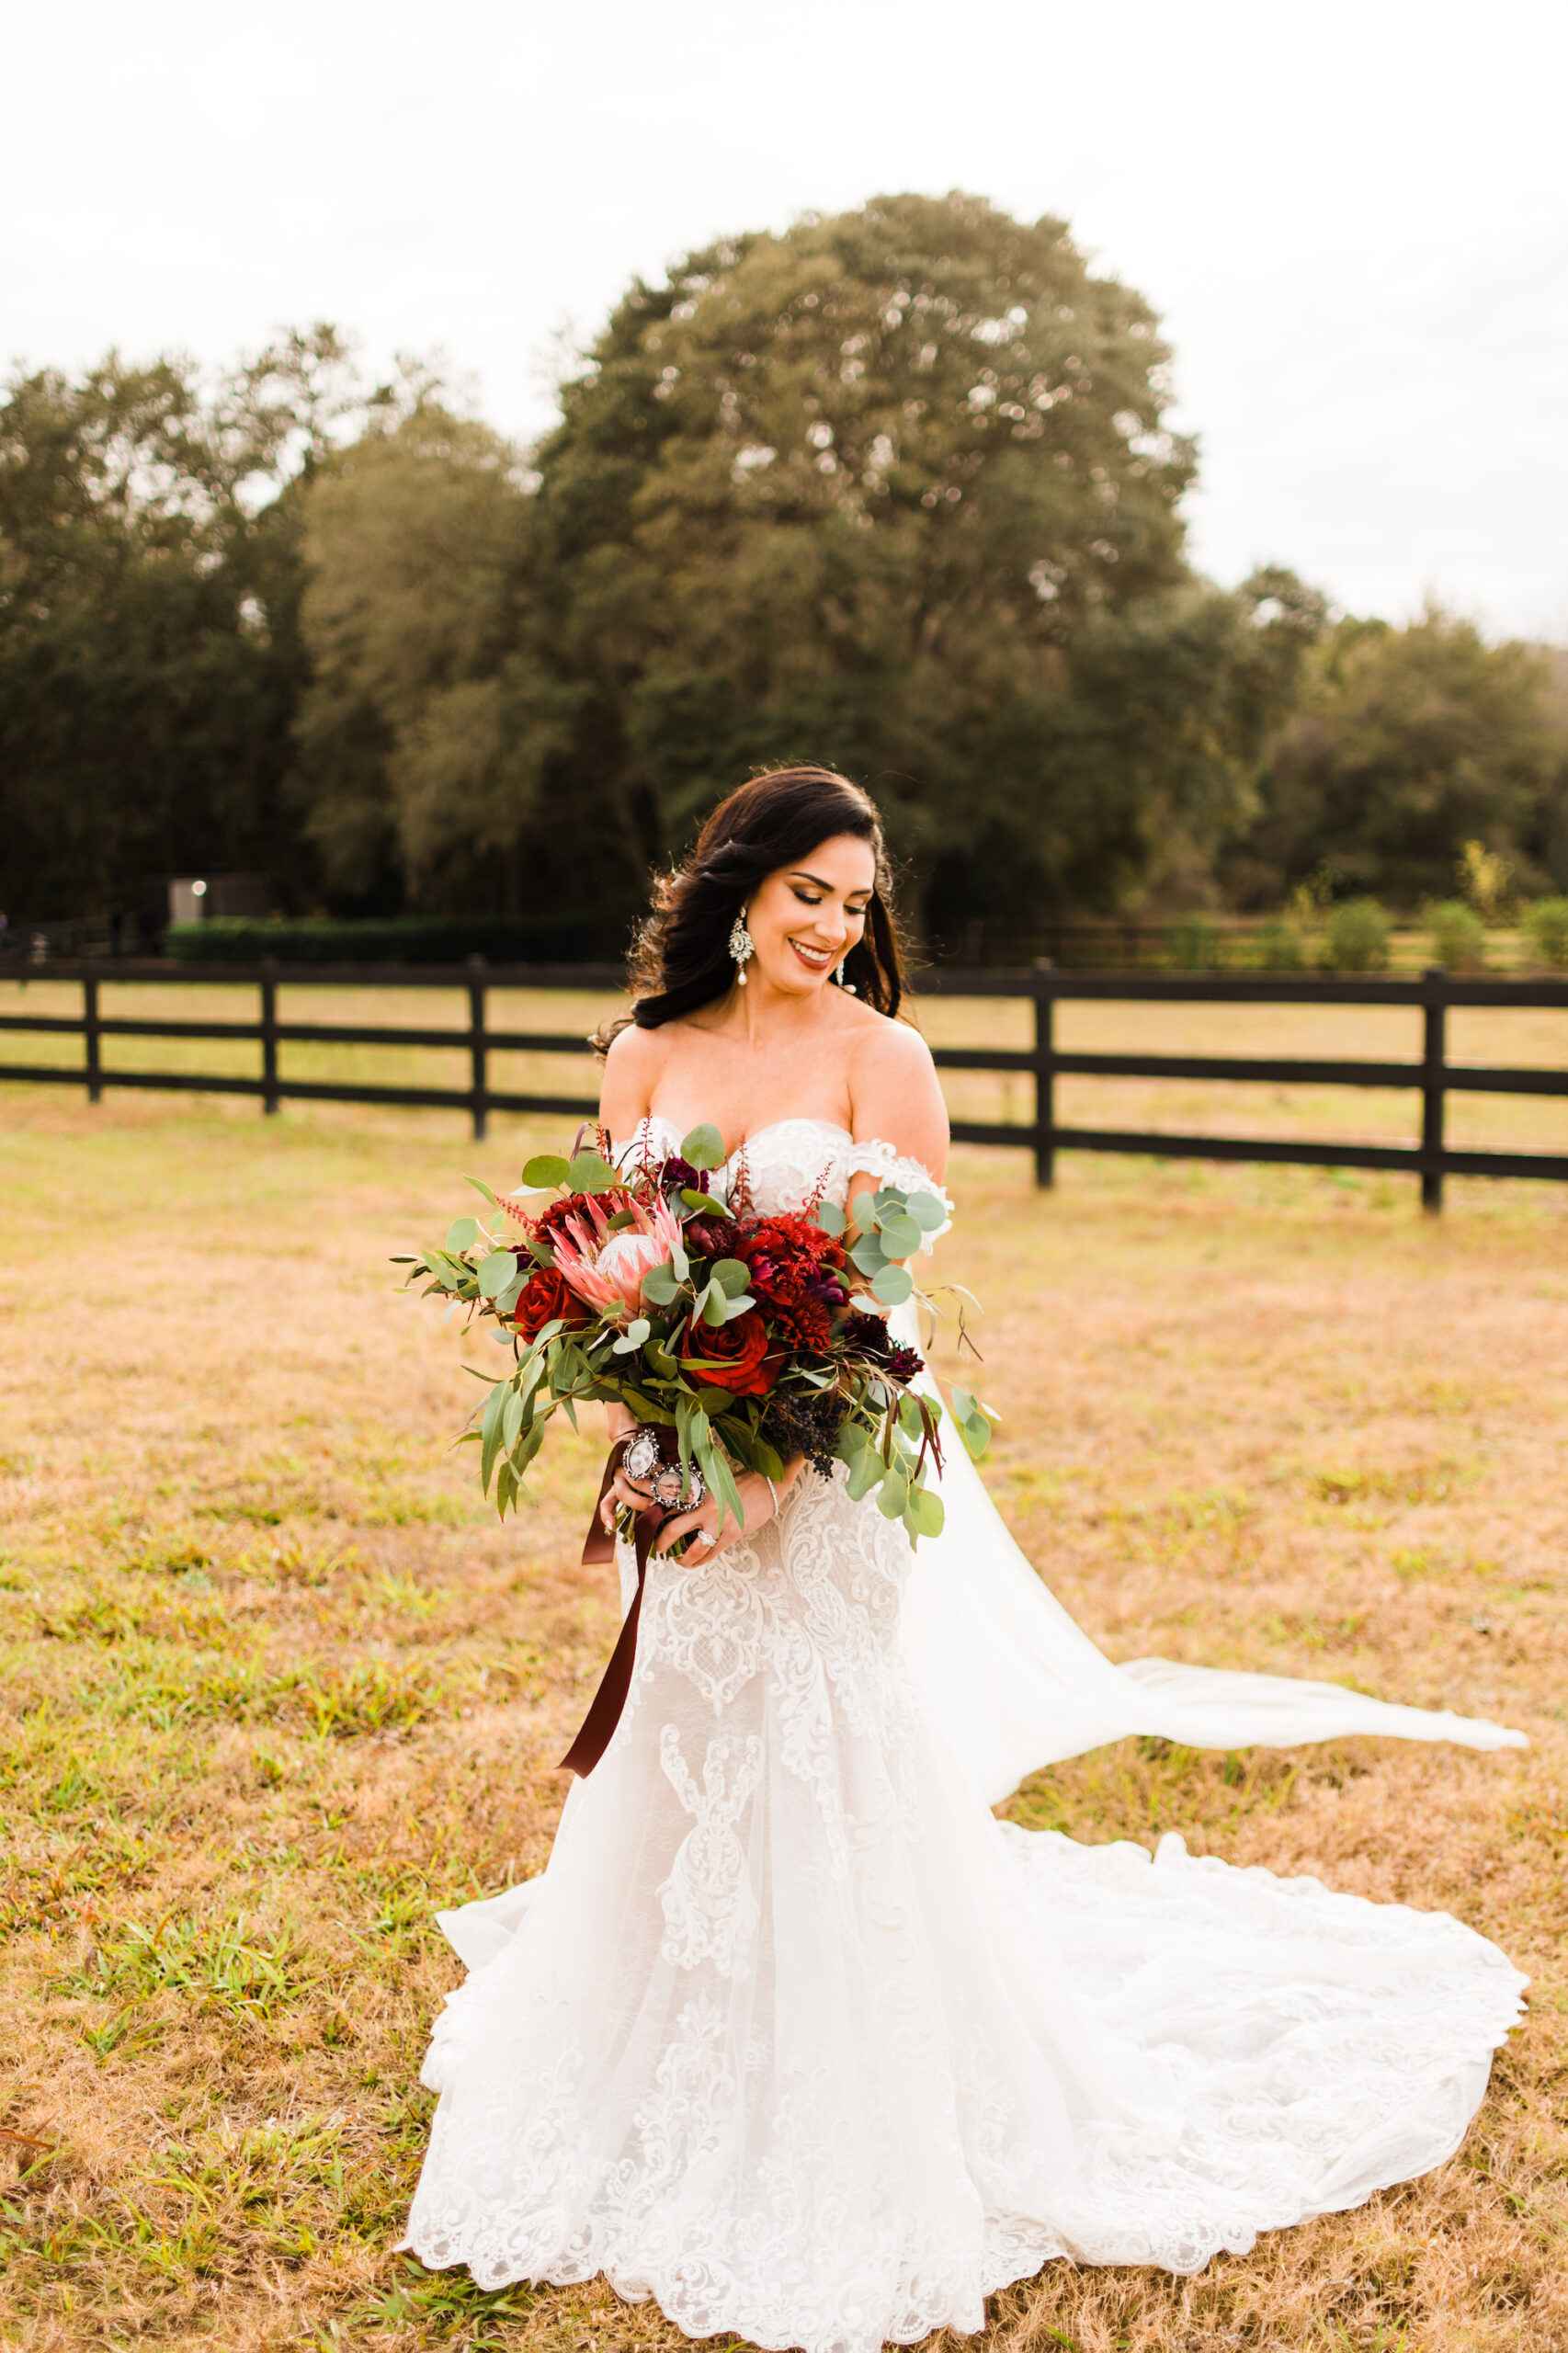 Burgundy Carnations, Roses, Crysanthemums, Pink King Protea Wedding Bouquet with Eucalyptus Greenery | Ivory Off-the-shoulder Lace Mermaid Wedding Gown Ideas | Brooksville Estate Venue Legacy Lane Weddings